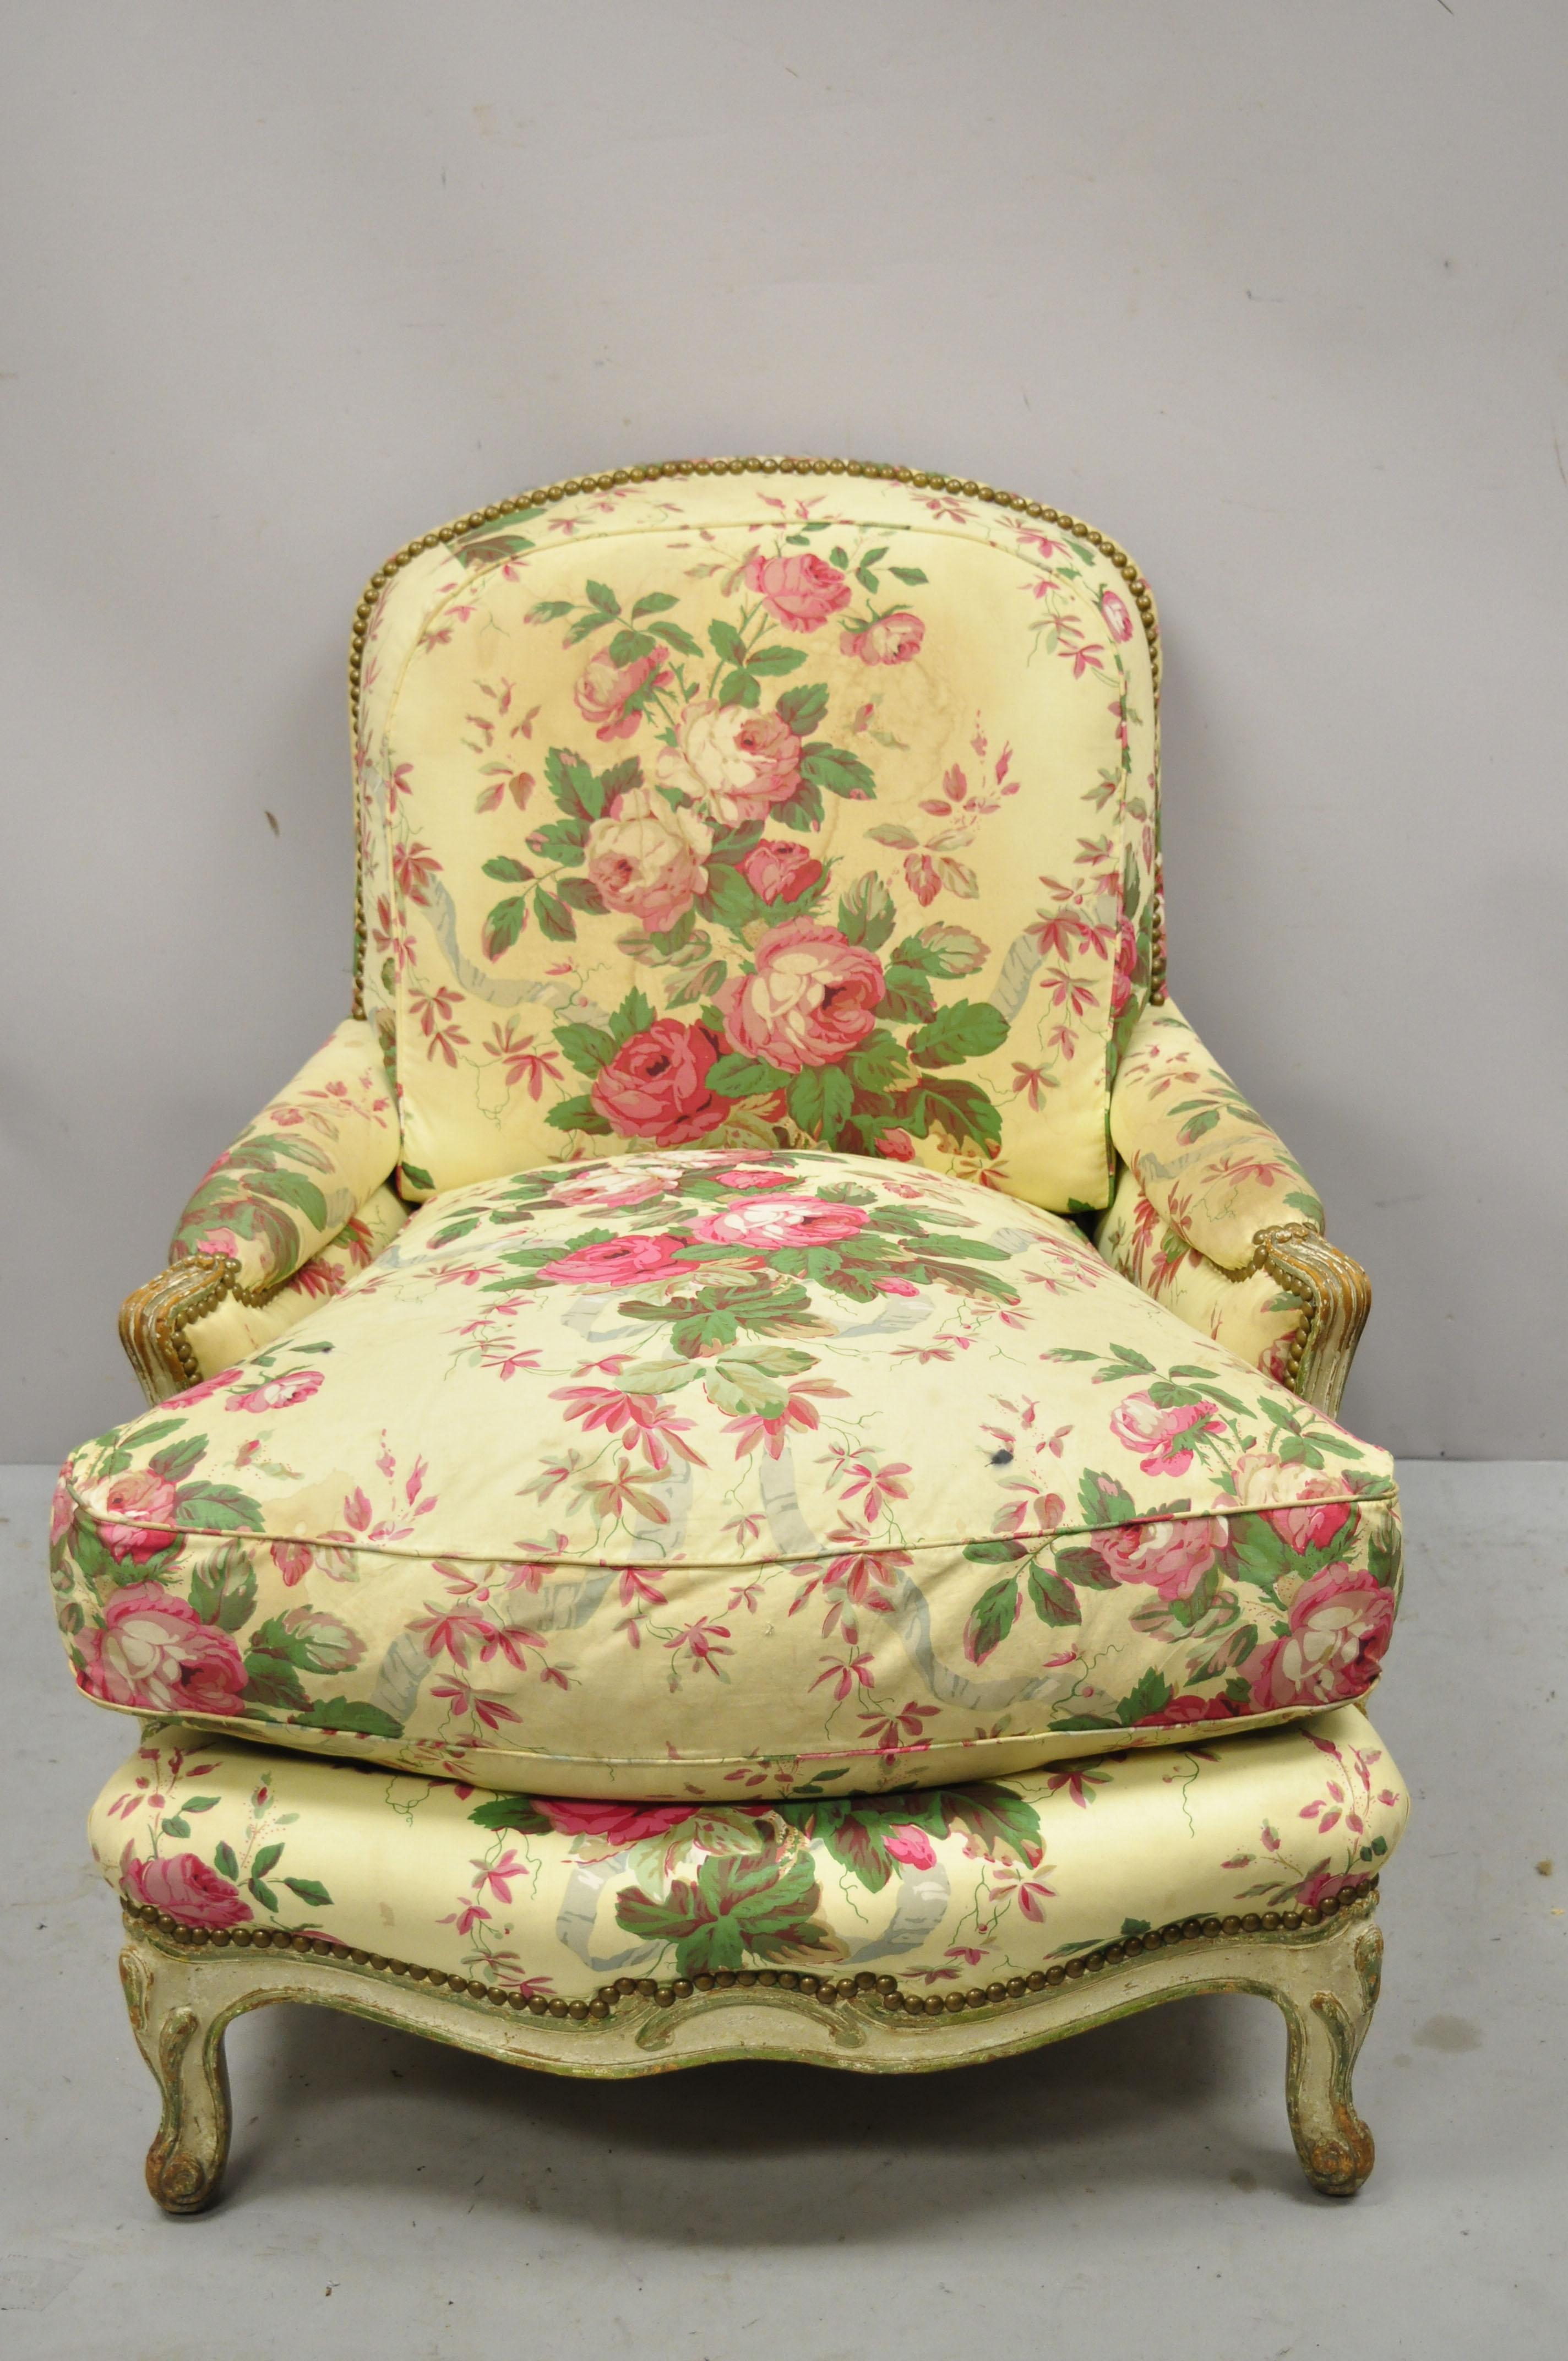 Antique French Provincial Louis XV Cream painted Bergere Club lounge chair attr. Maison Jansen. Item features cream distress painted frame, upholstered frame, nailhead trim, solid wood frame, cabriole legs, very nice antique item, quality French